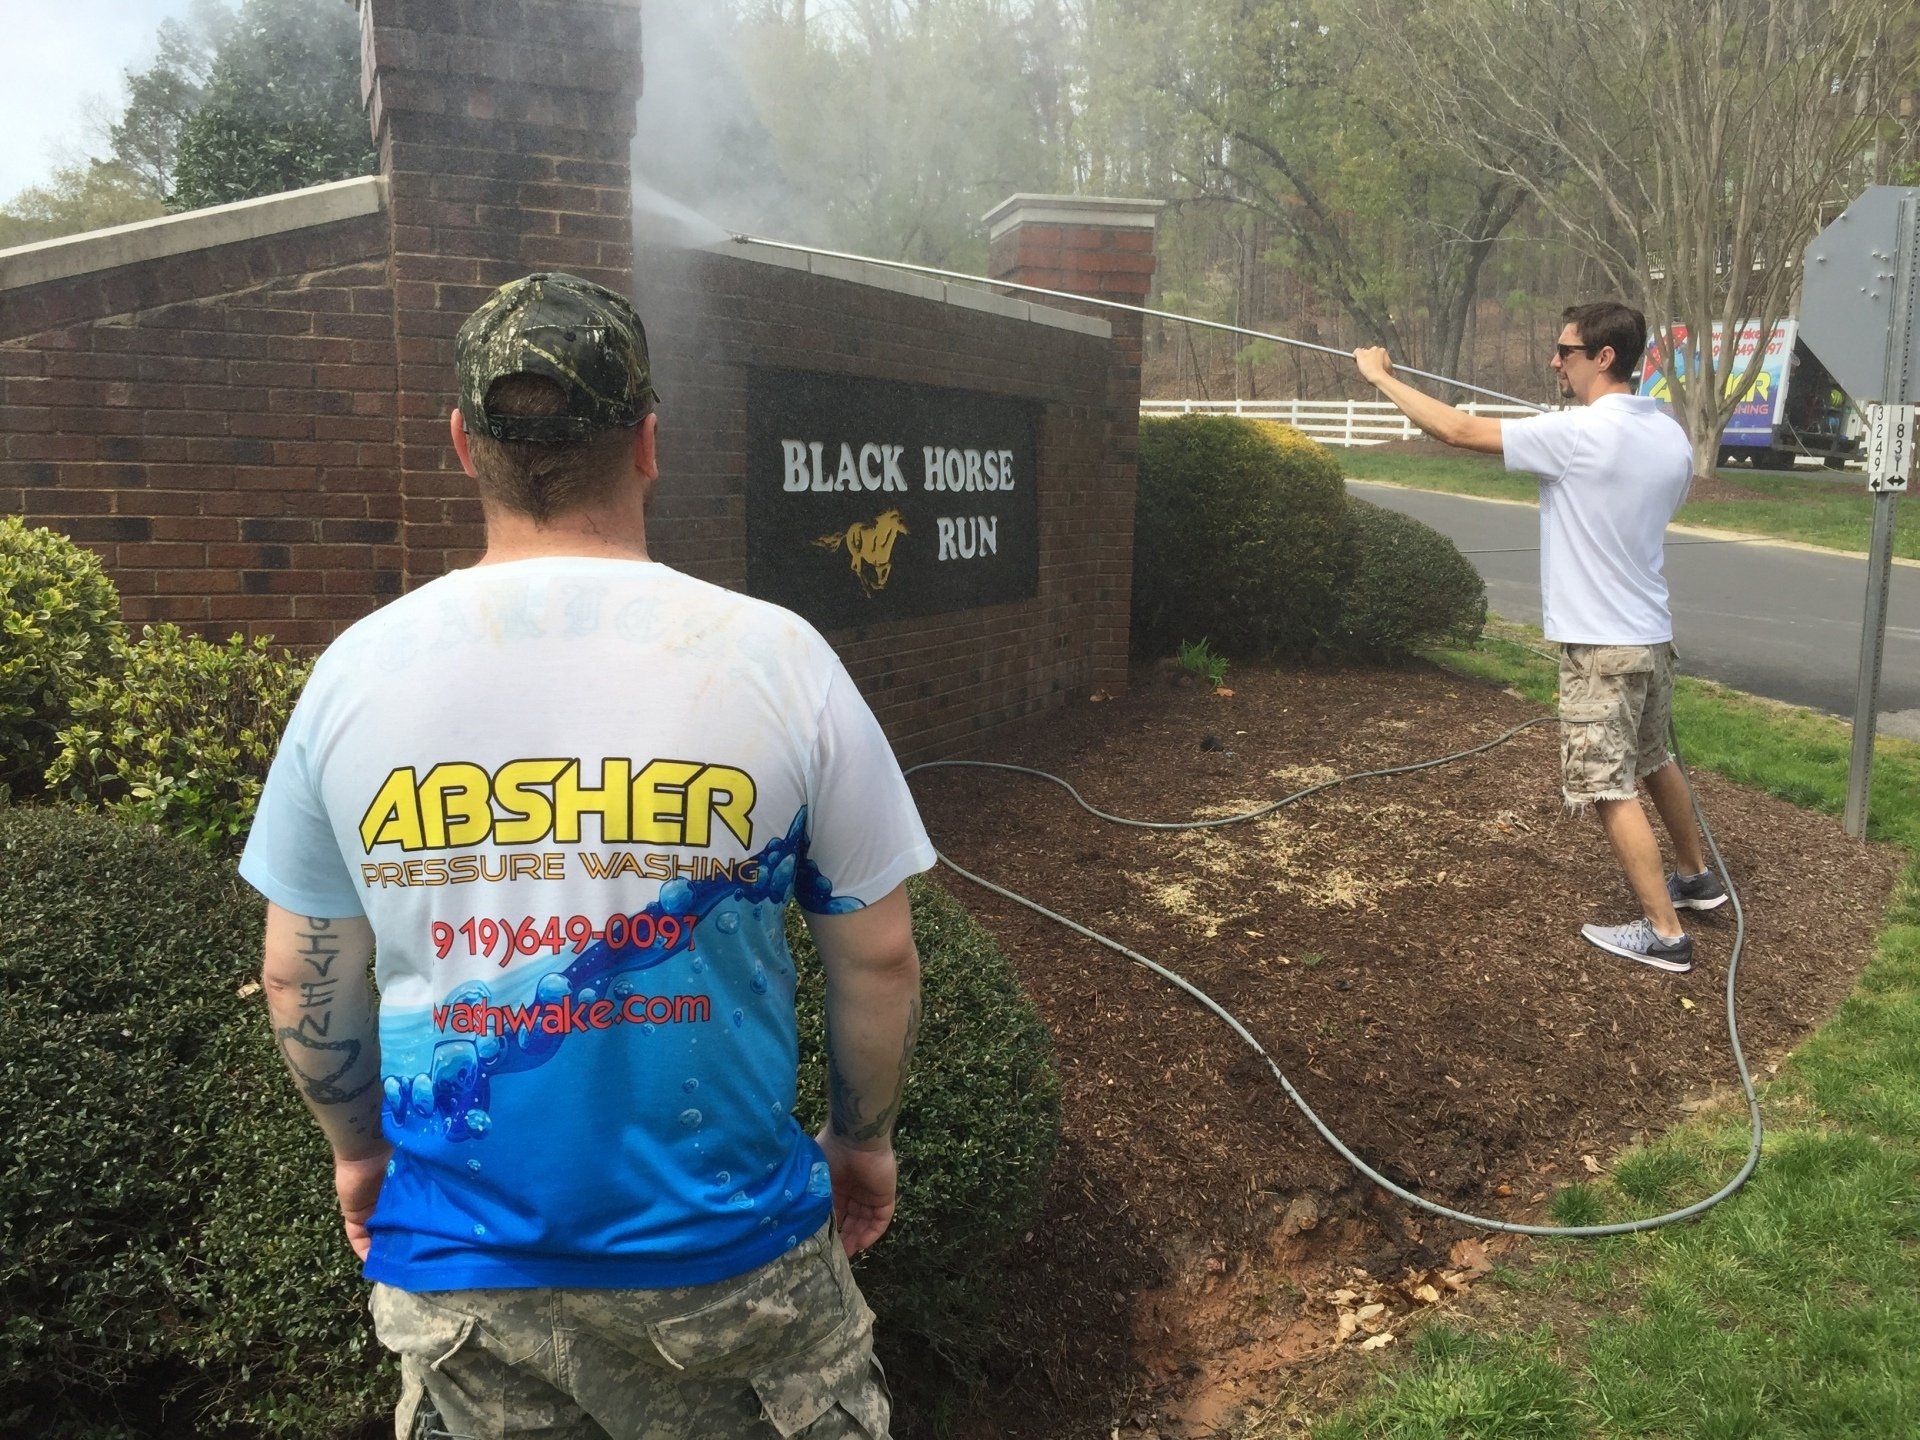 Absher Pressure Washers Cleaning Sign